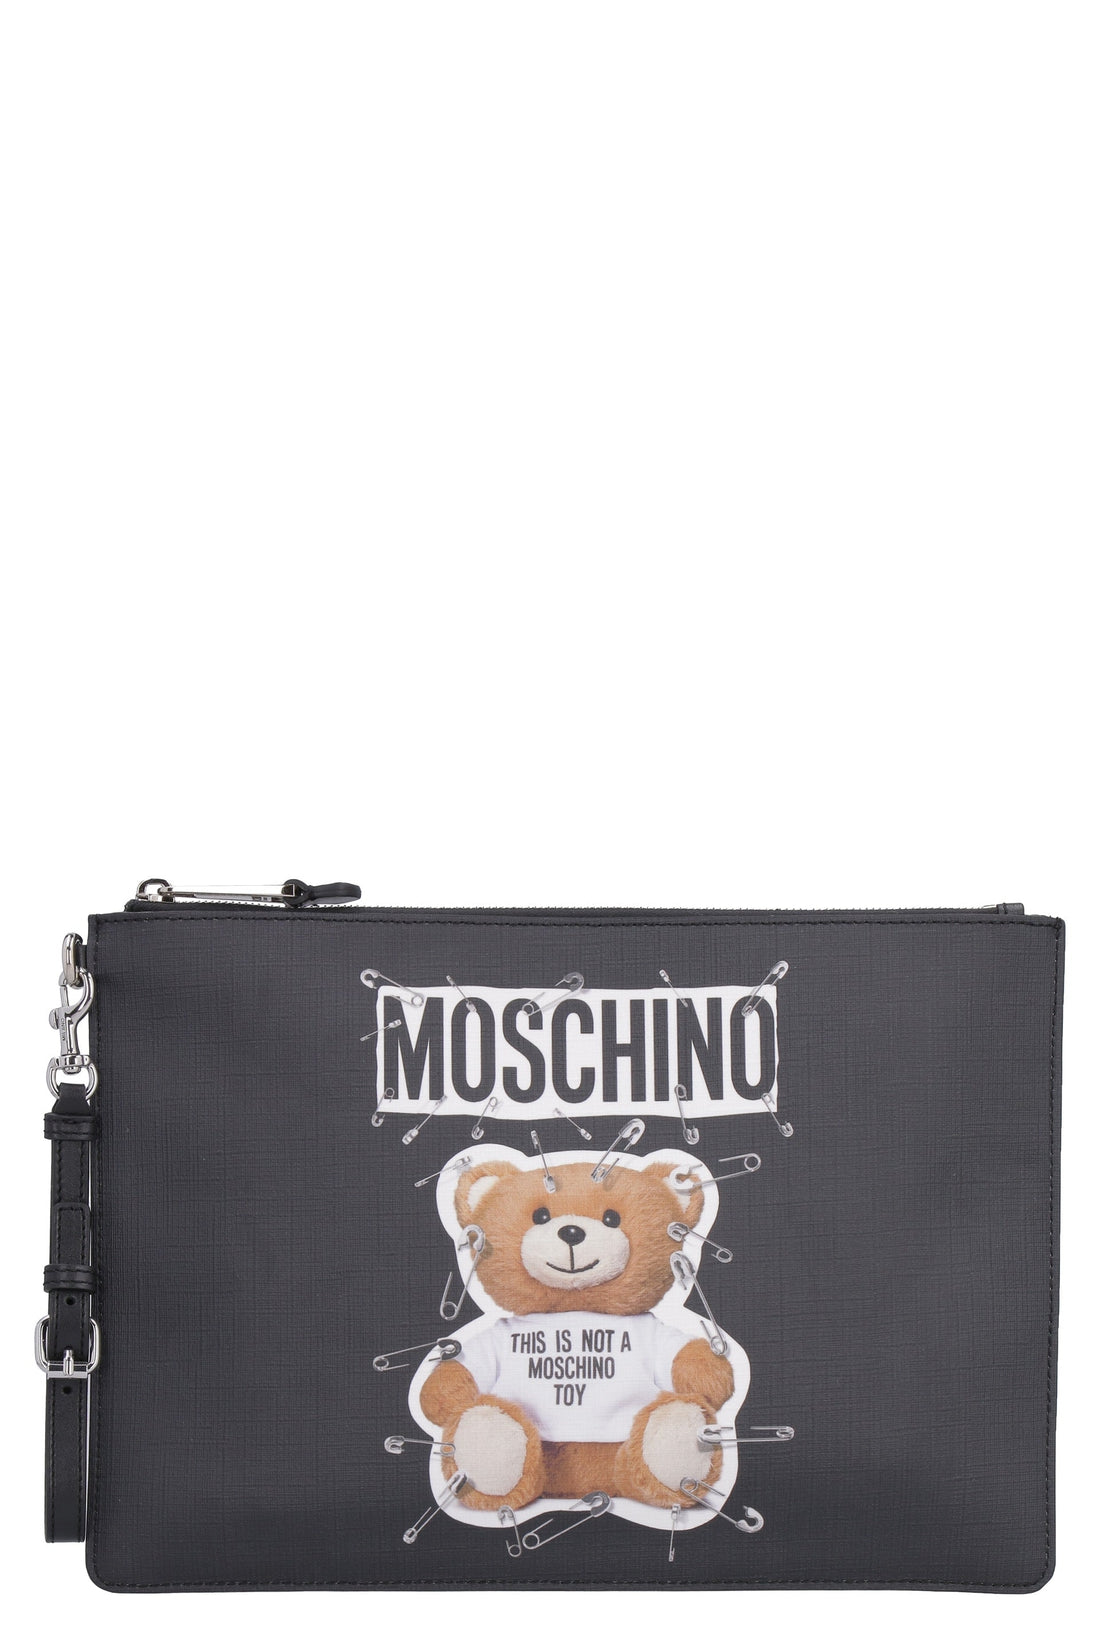 Moschino-OUTLET-SALE-Printed flat pouch-ARCHIVIST